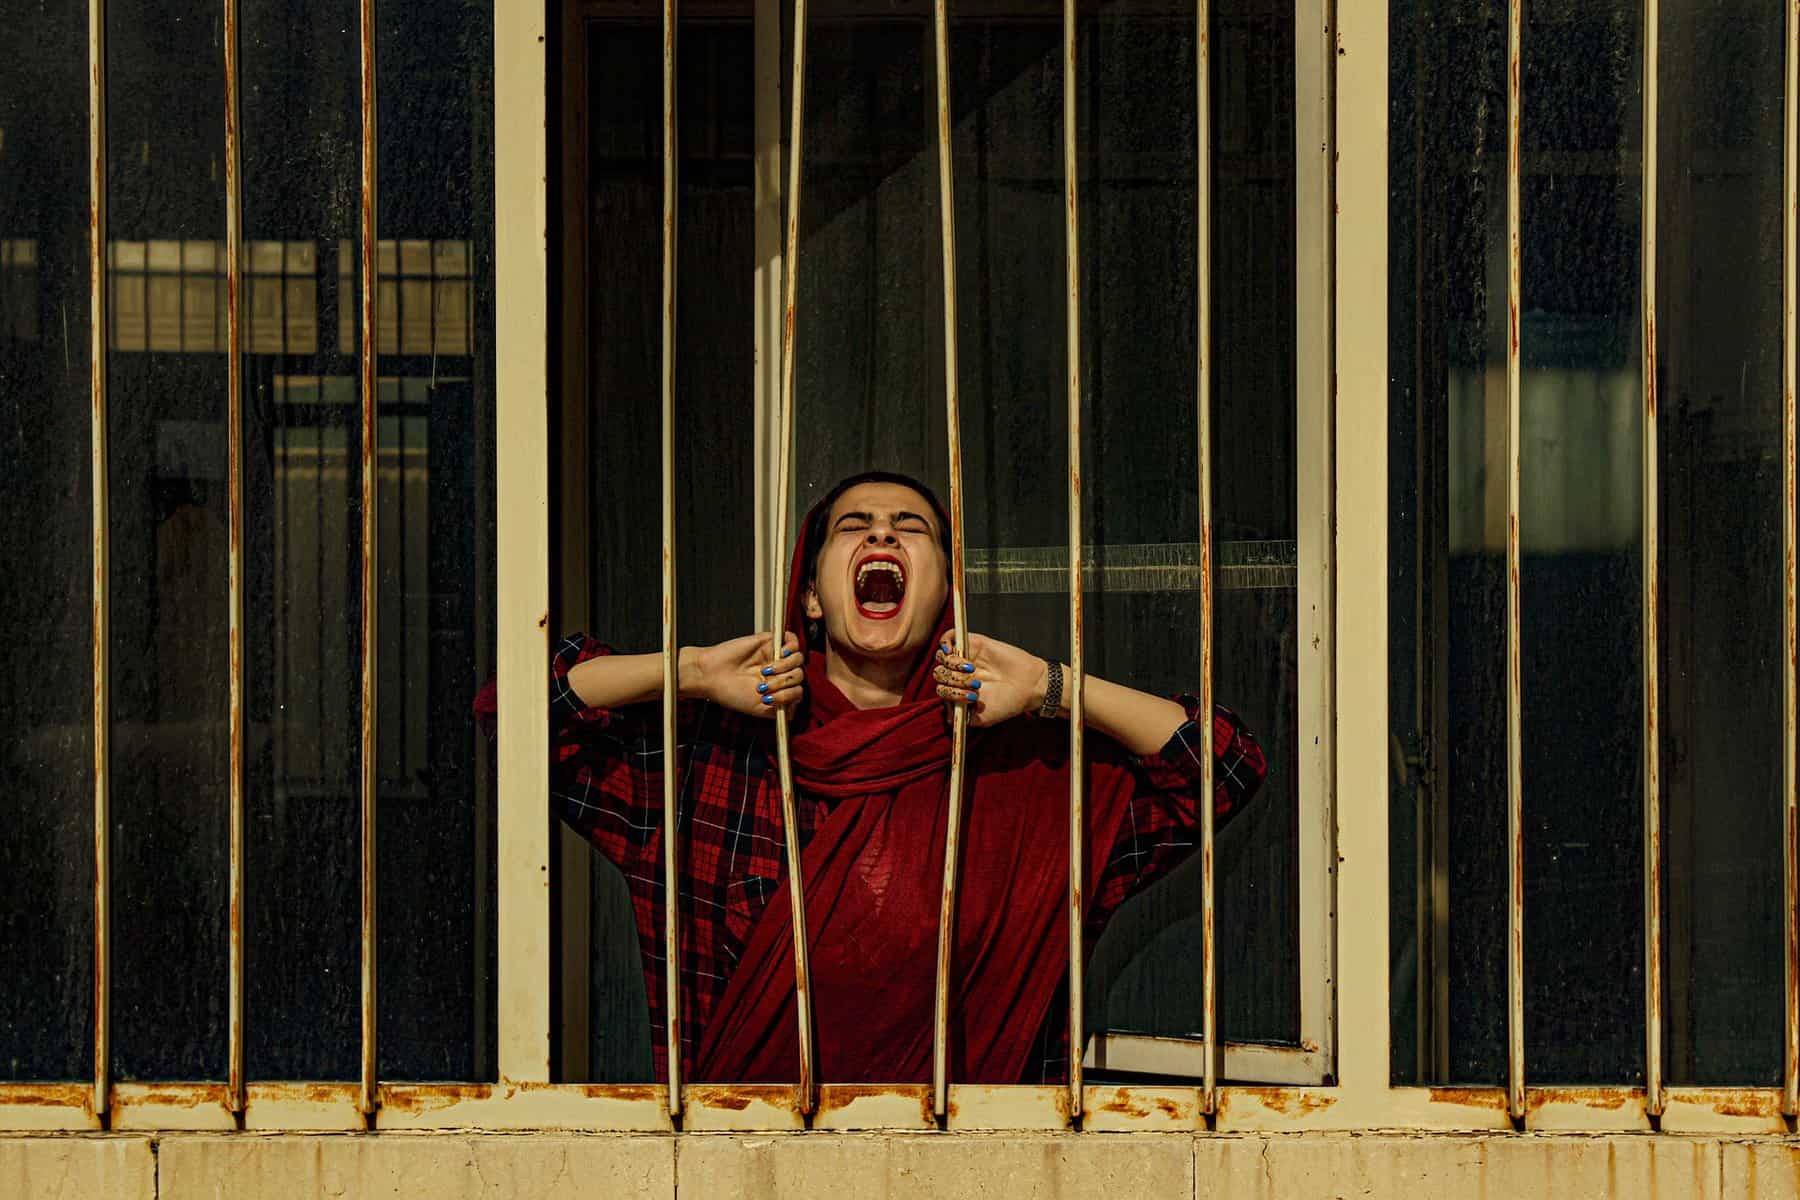 A woman in red is shown against bars with her hands trying to pull them apart while she yells.